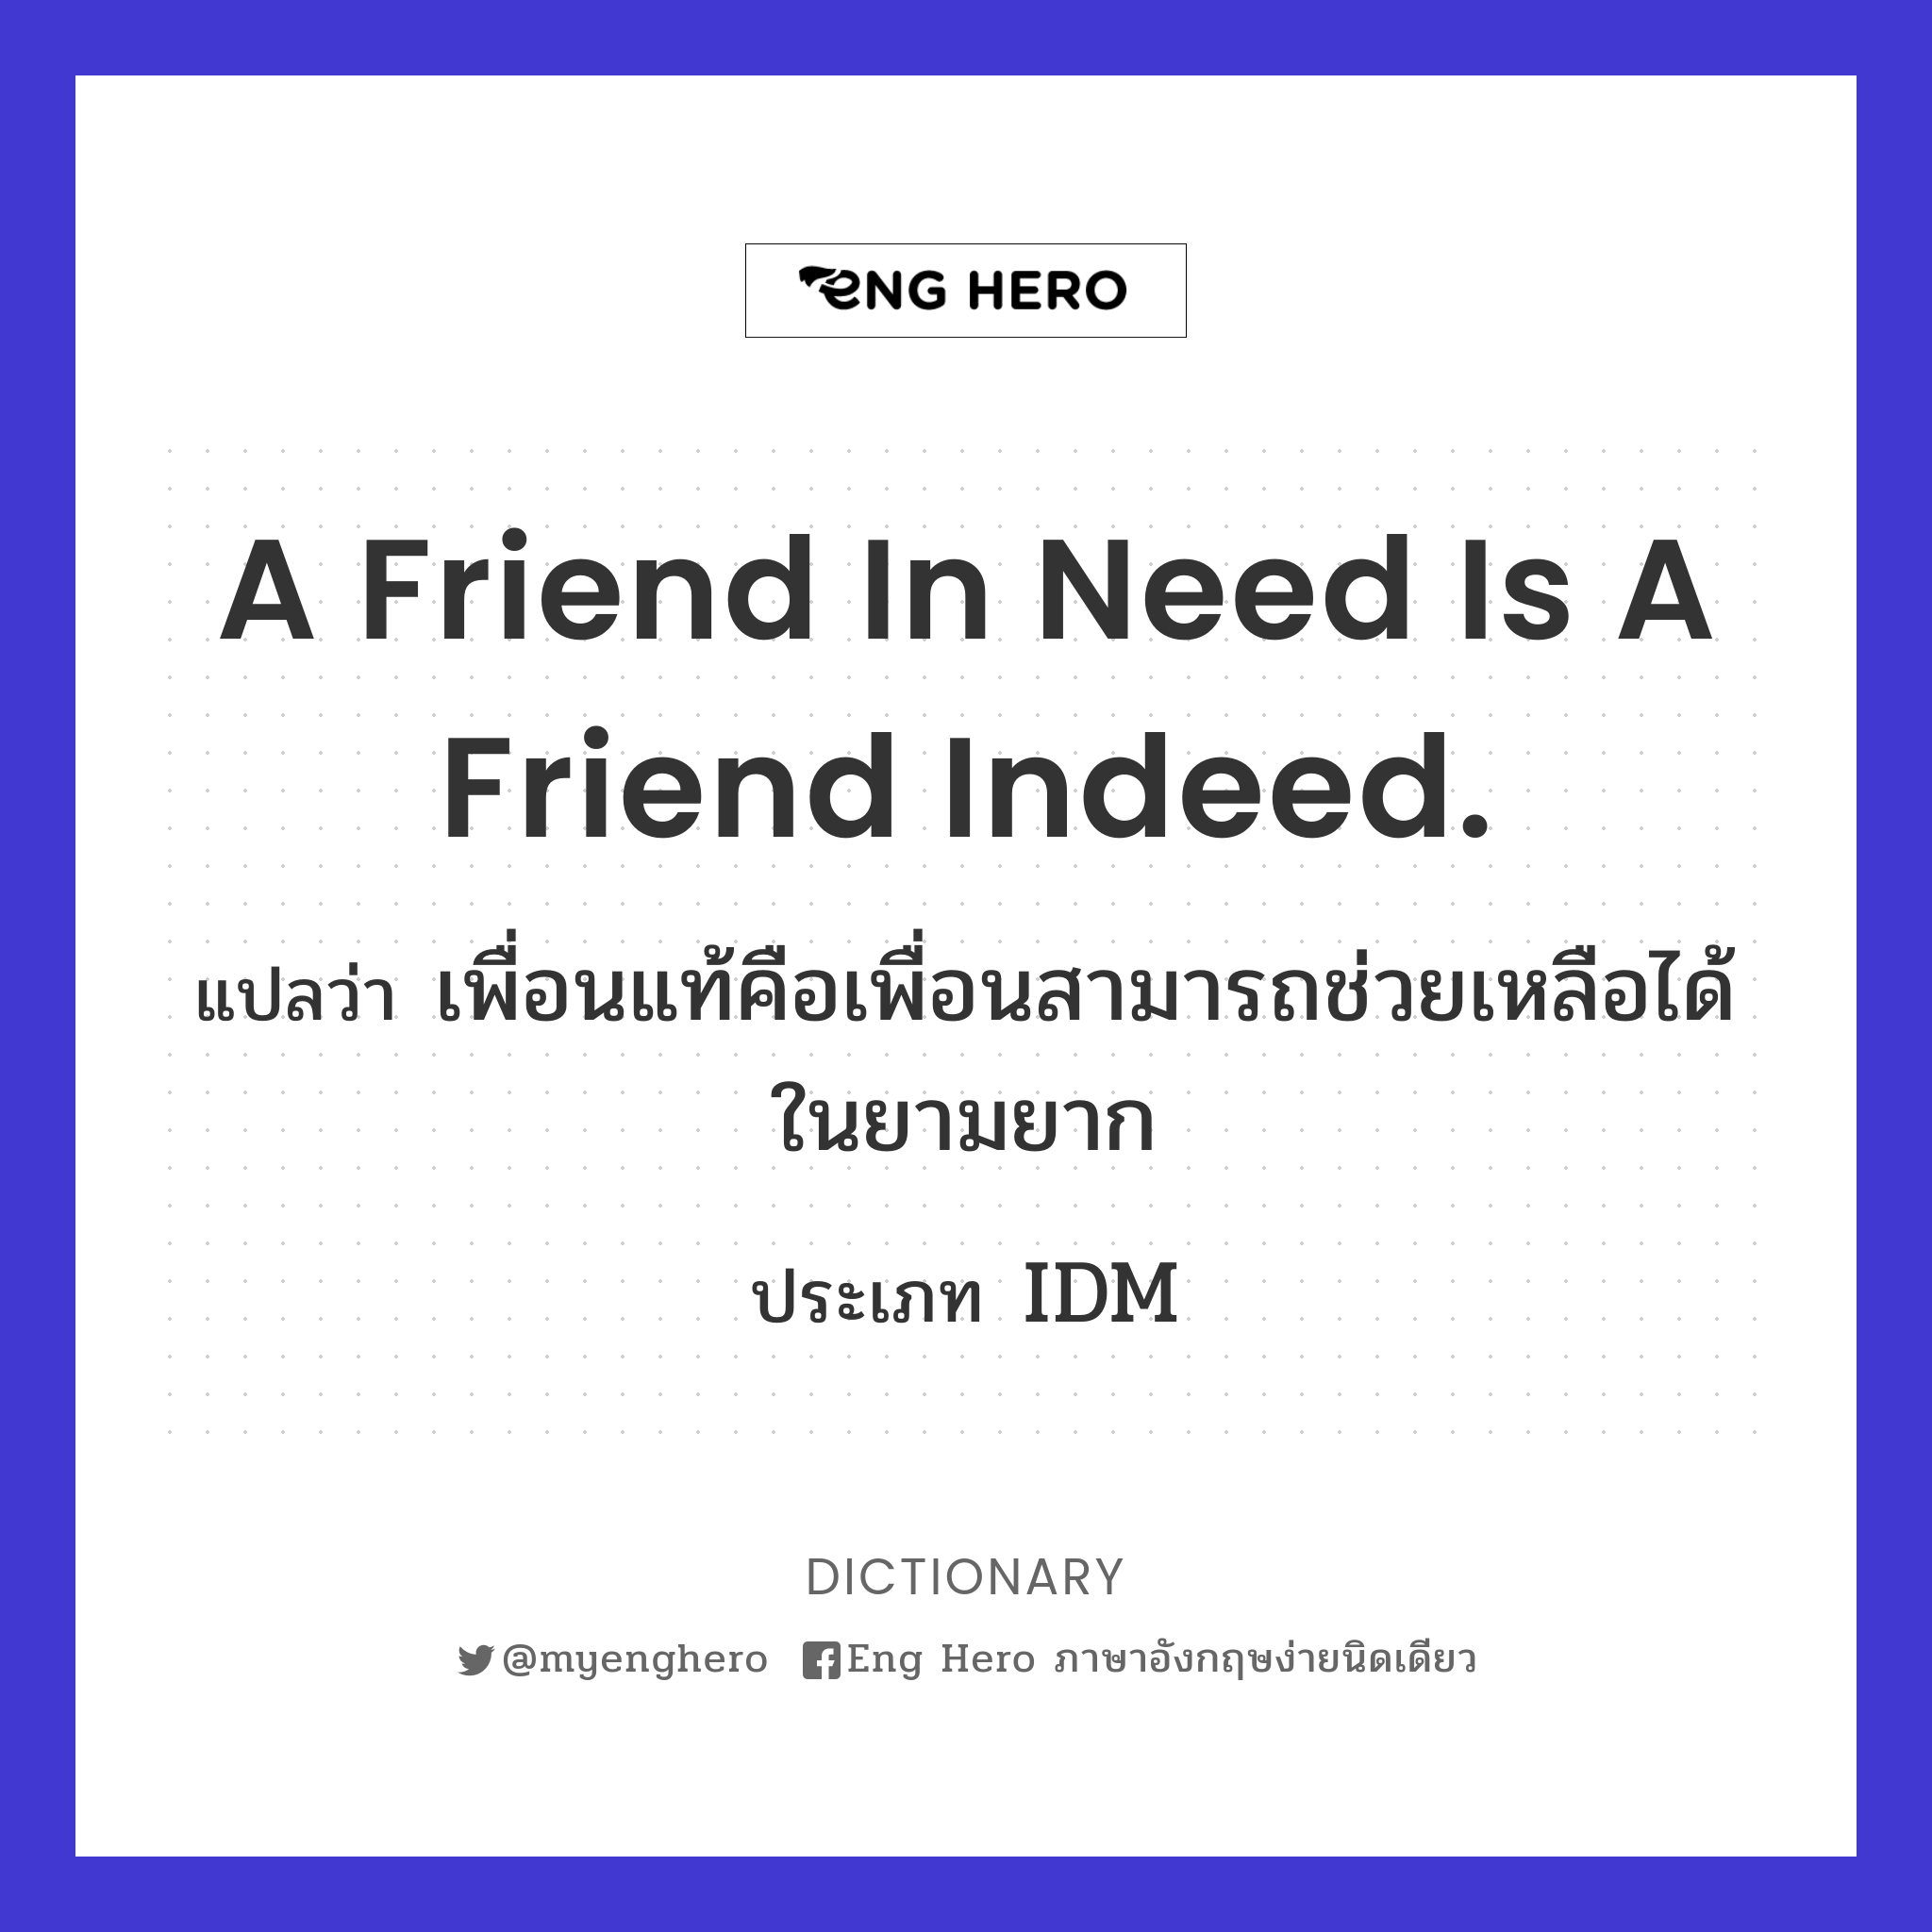 A friend in need is a friend indeed.